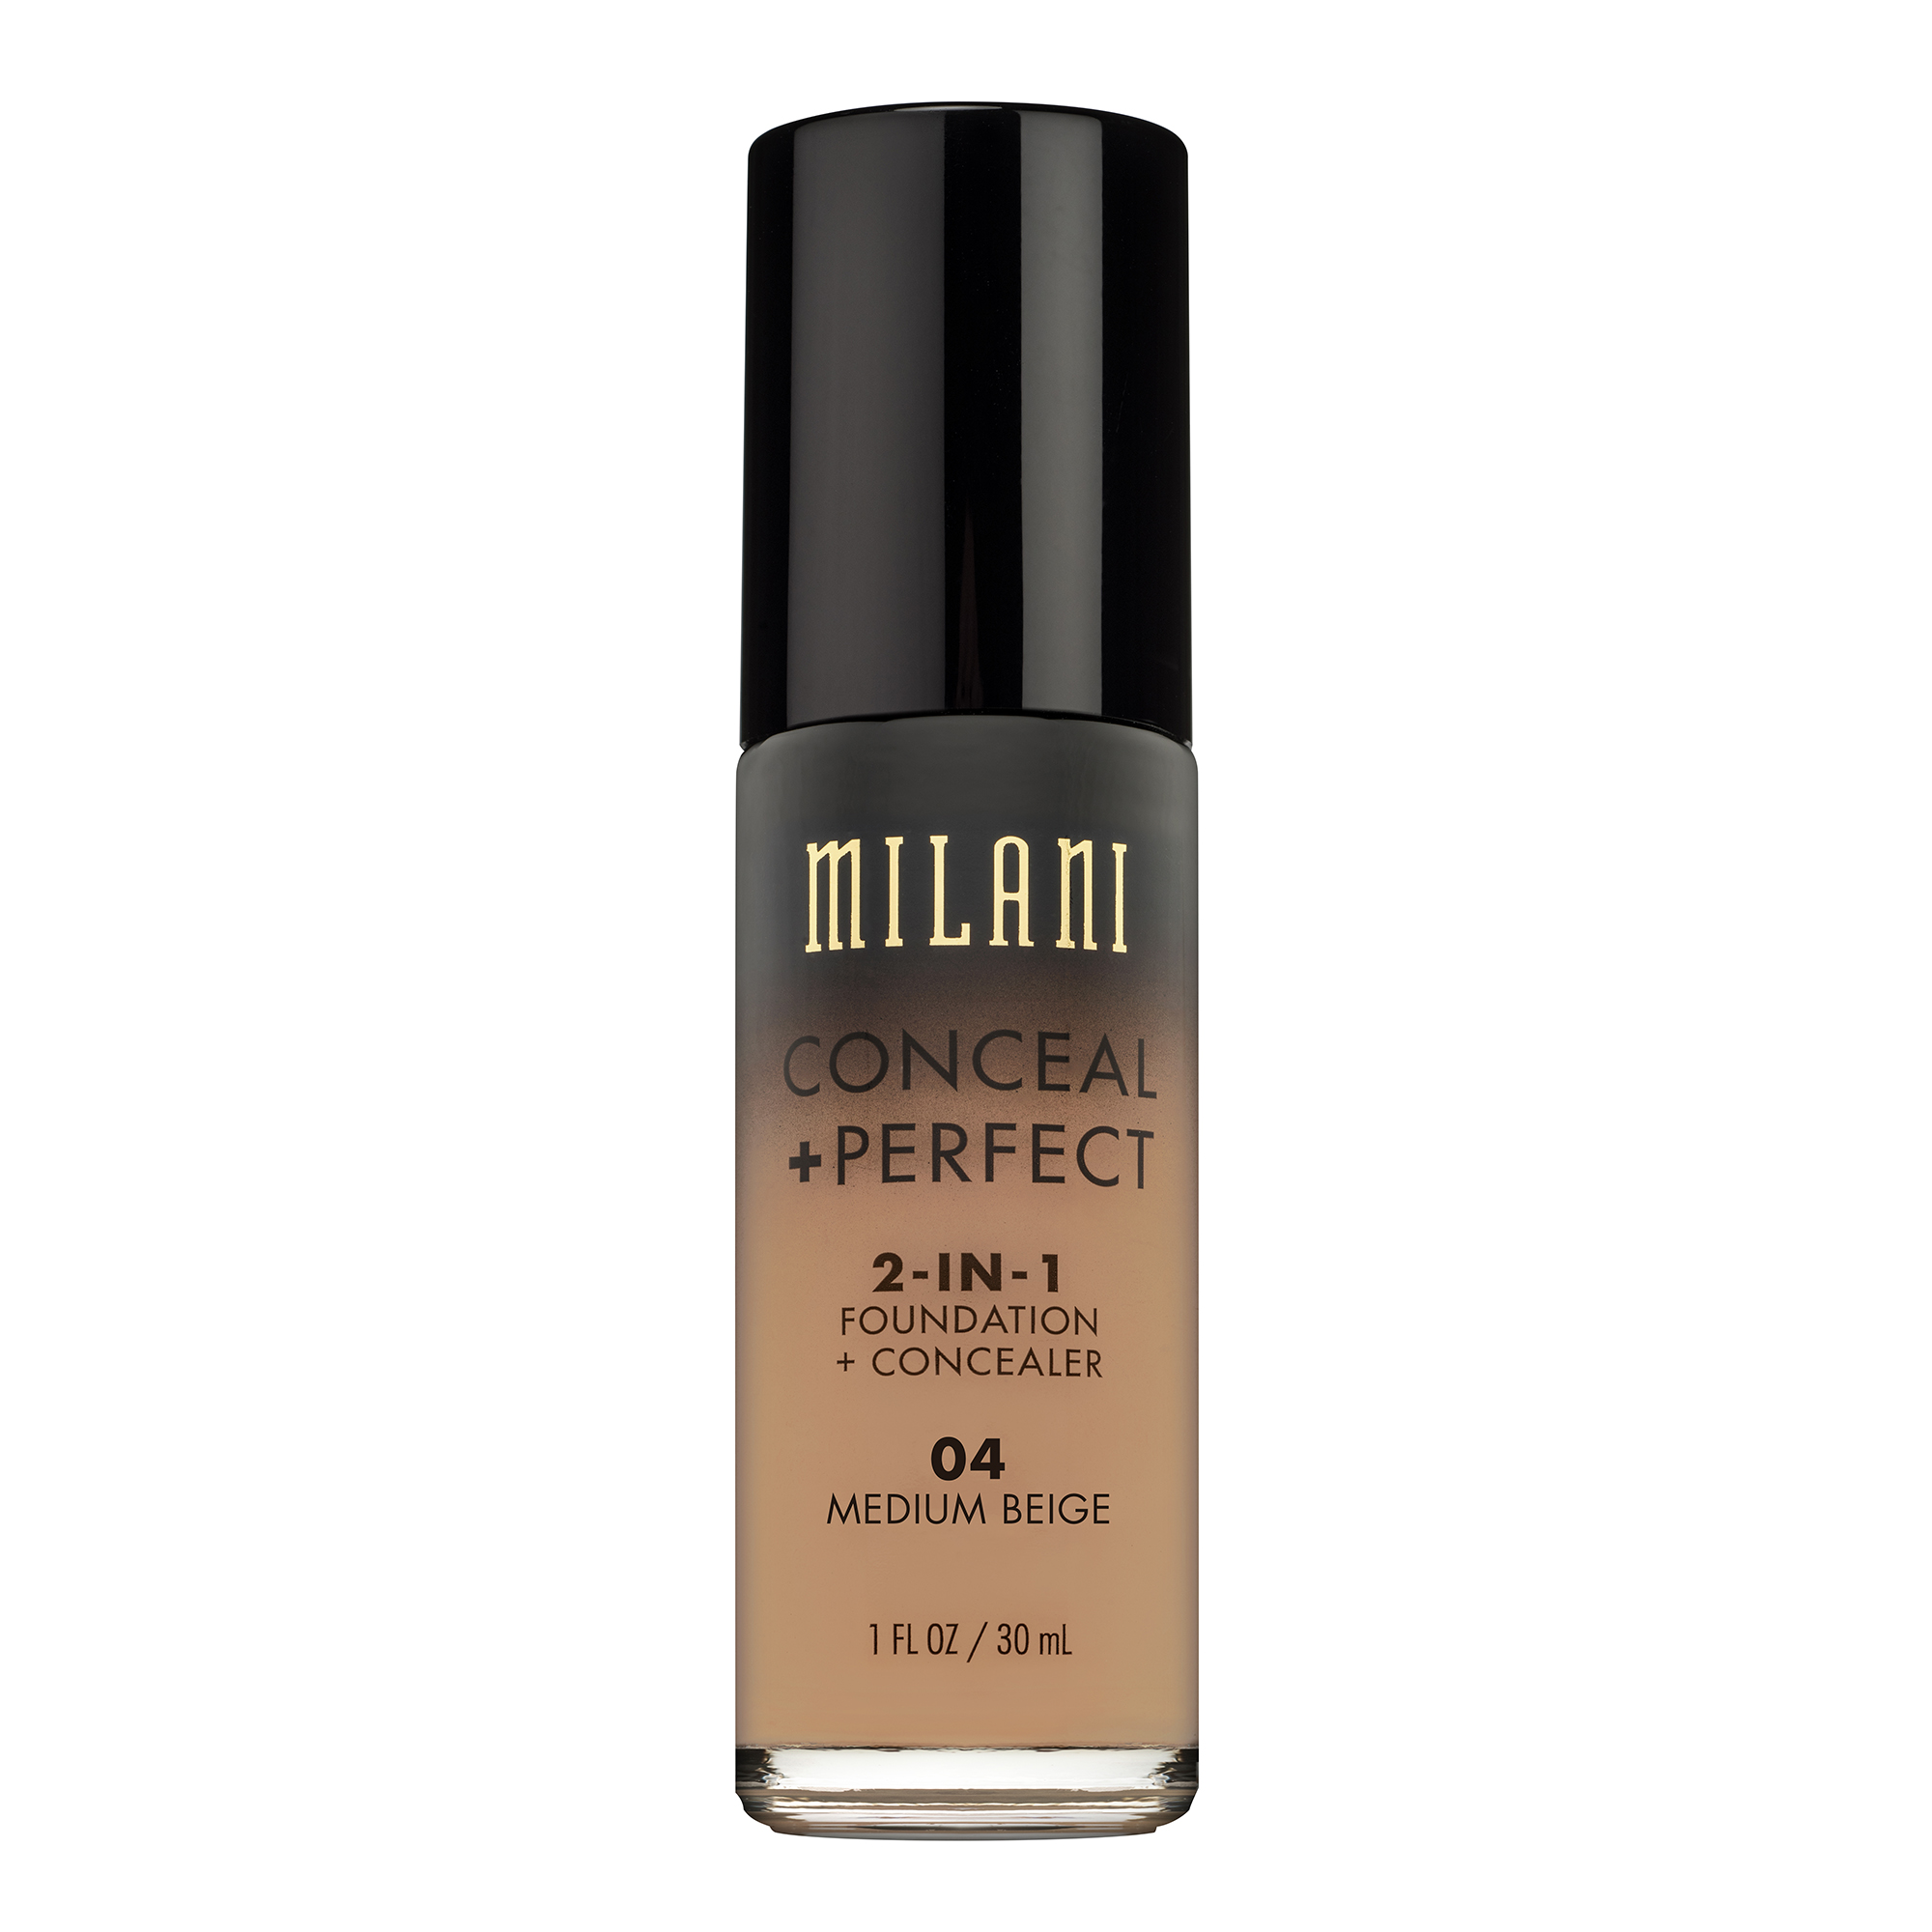 Milani Conceal + Perfect 2-in-1 Foundation + Concealer, Medium Beige - image 1 of 7